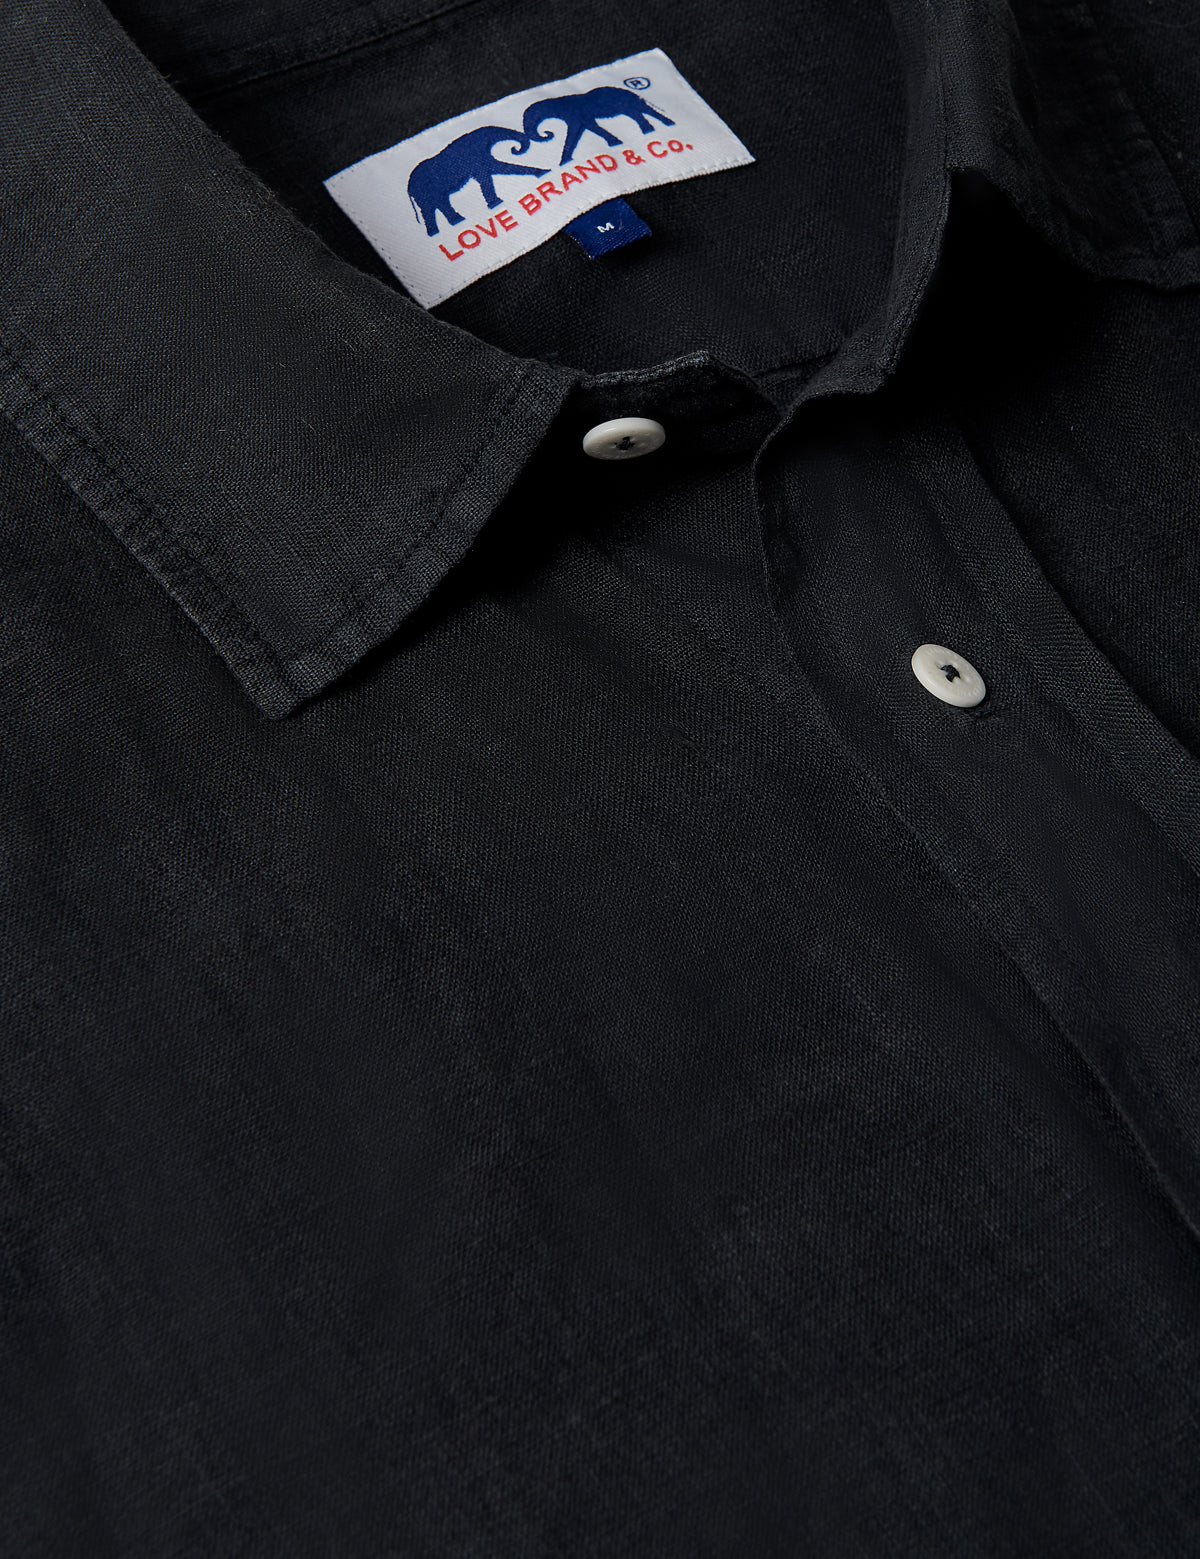 Close-up of Men's Volcanic Black Manjack Linen Shirt, showcasing collar, buttons, and Love Brand & Co. label.